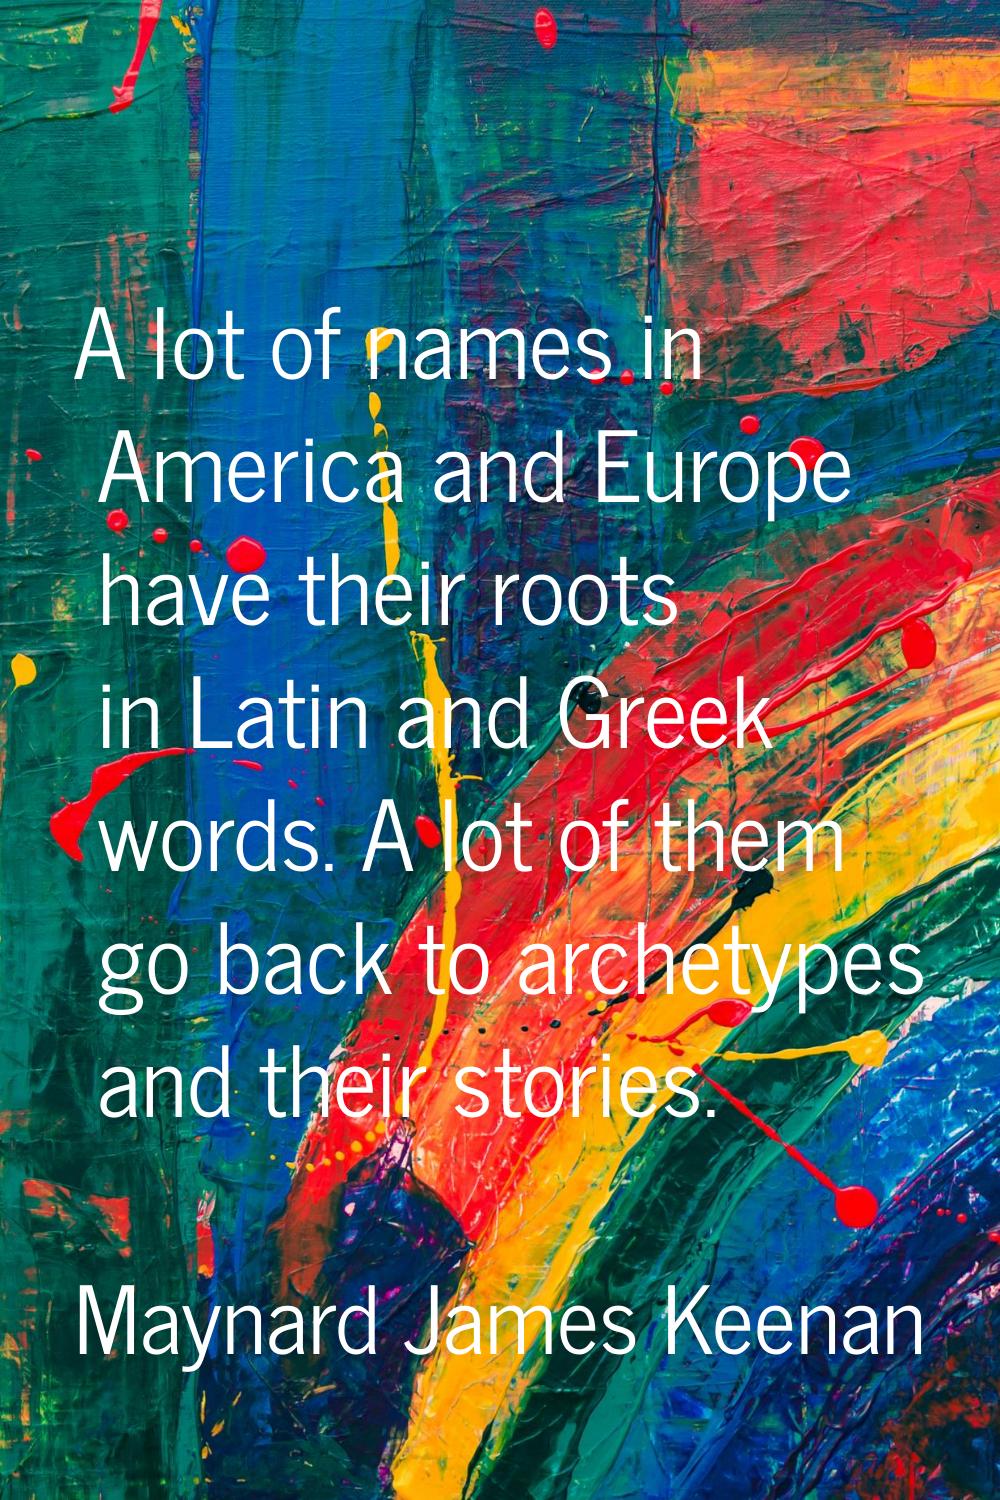 A lot of names in America and Europe have their roots in Latin and Greek words. A lot of them go ba